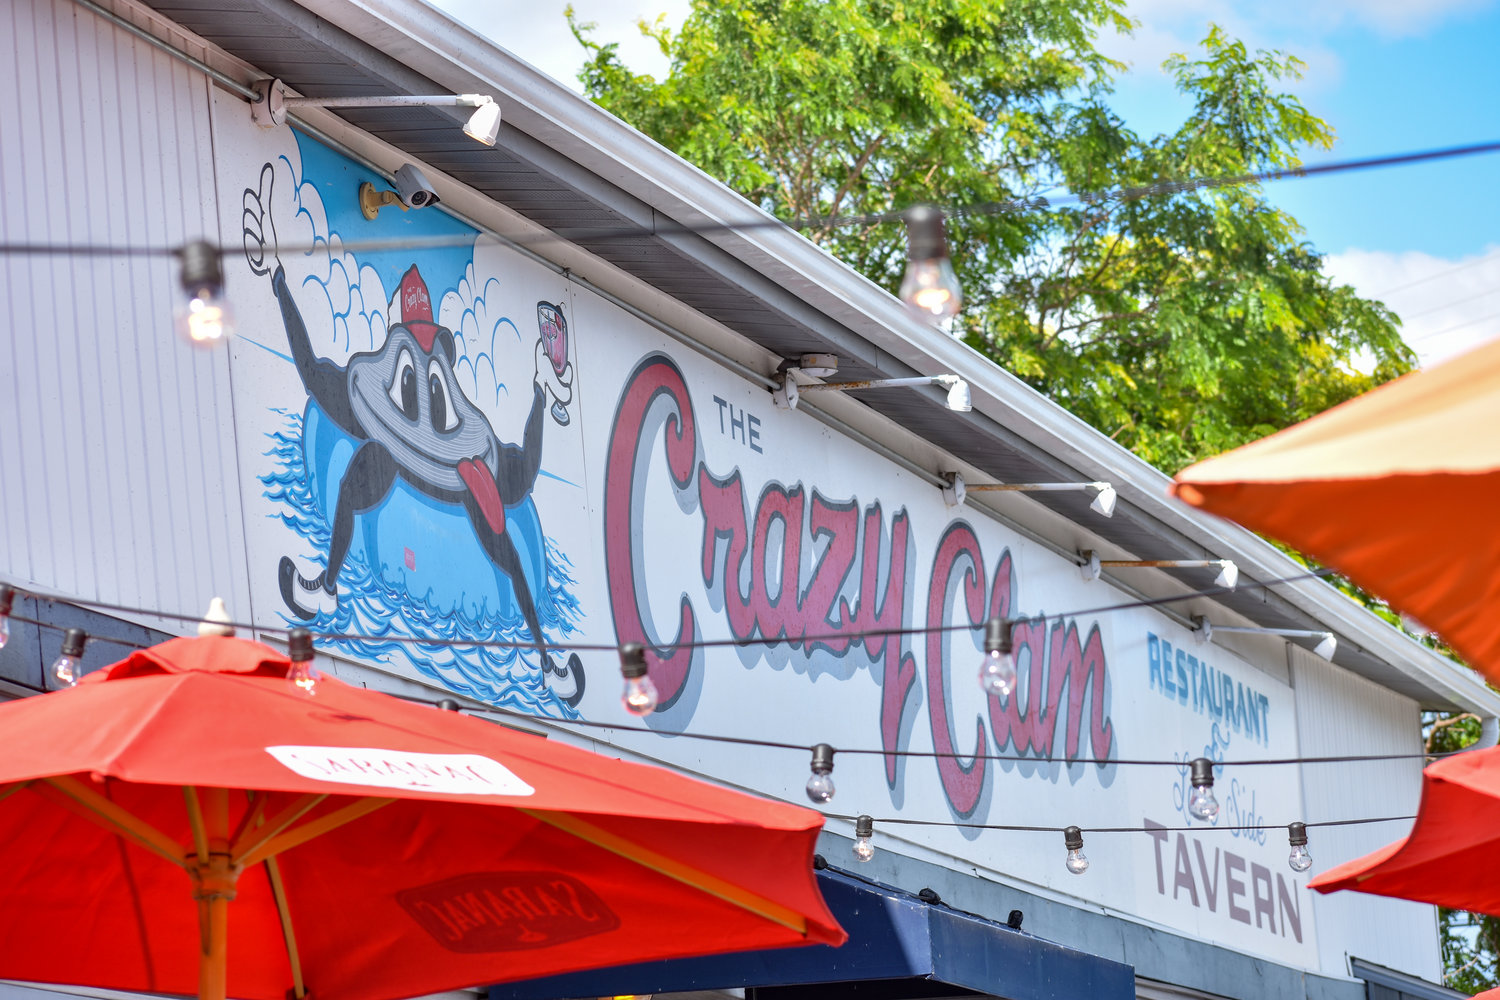 The Crazy Clam in Sylvan Beach reopened this summer under new ownership.